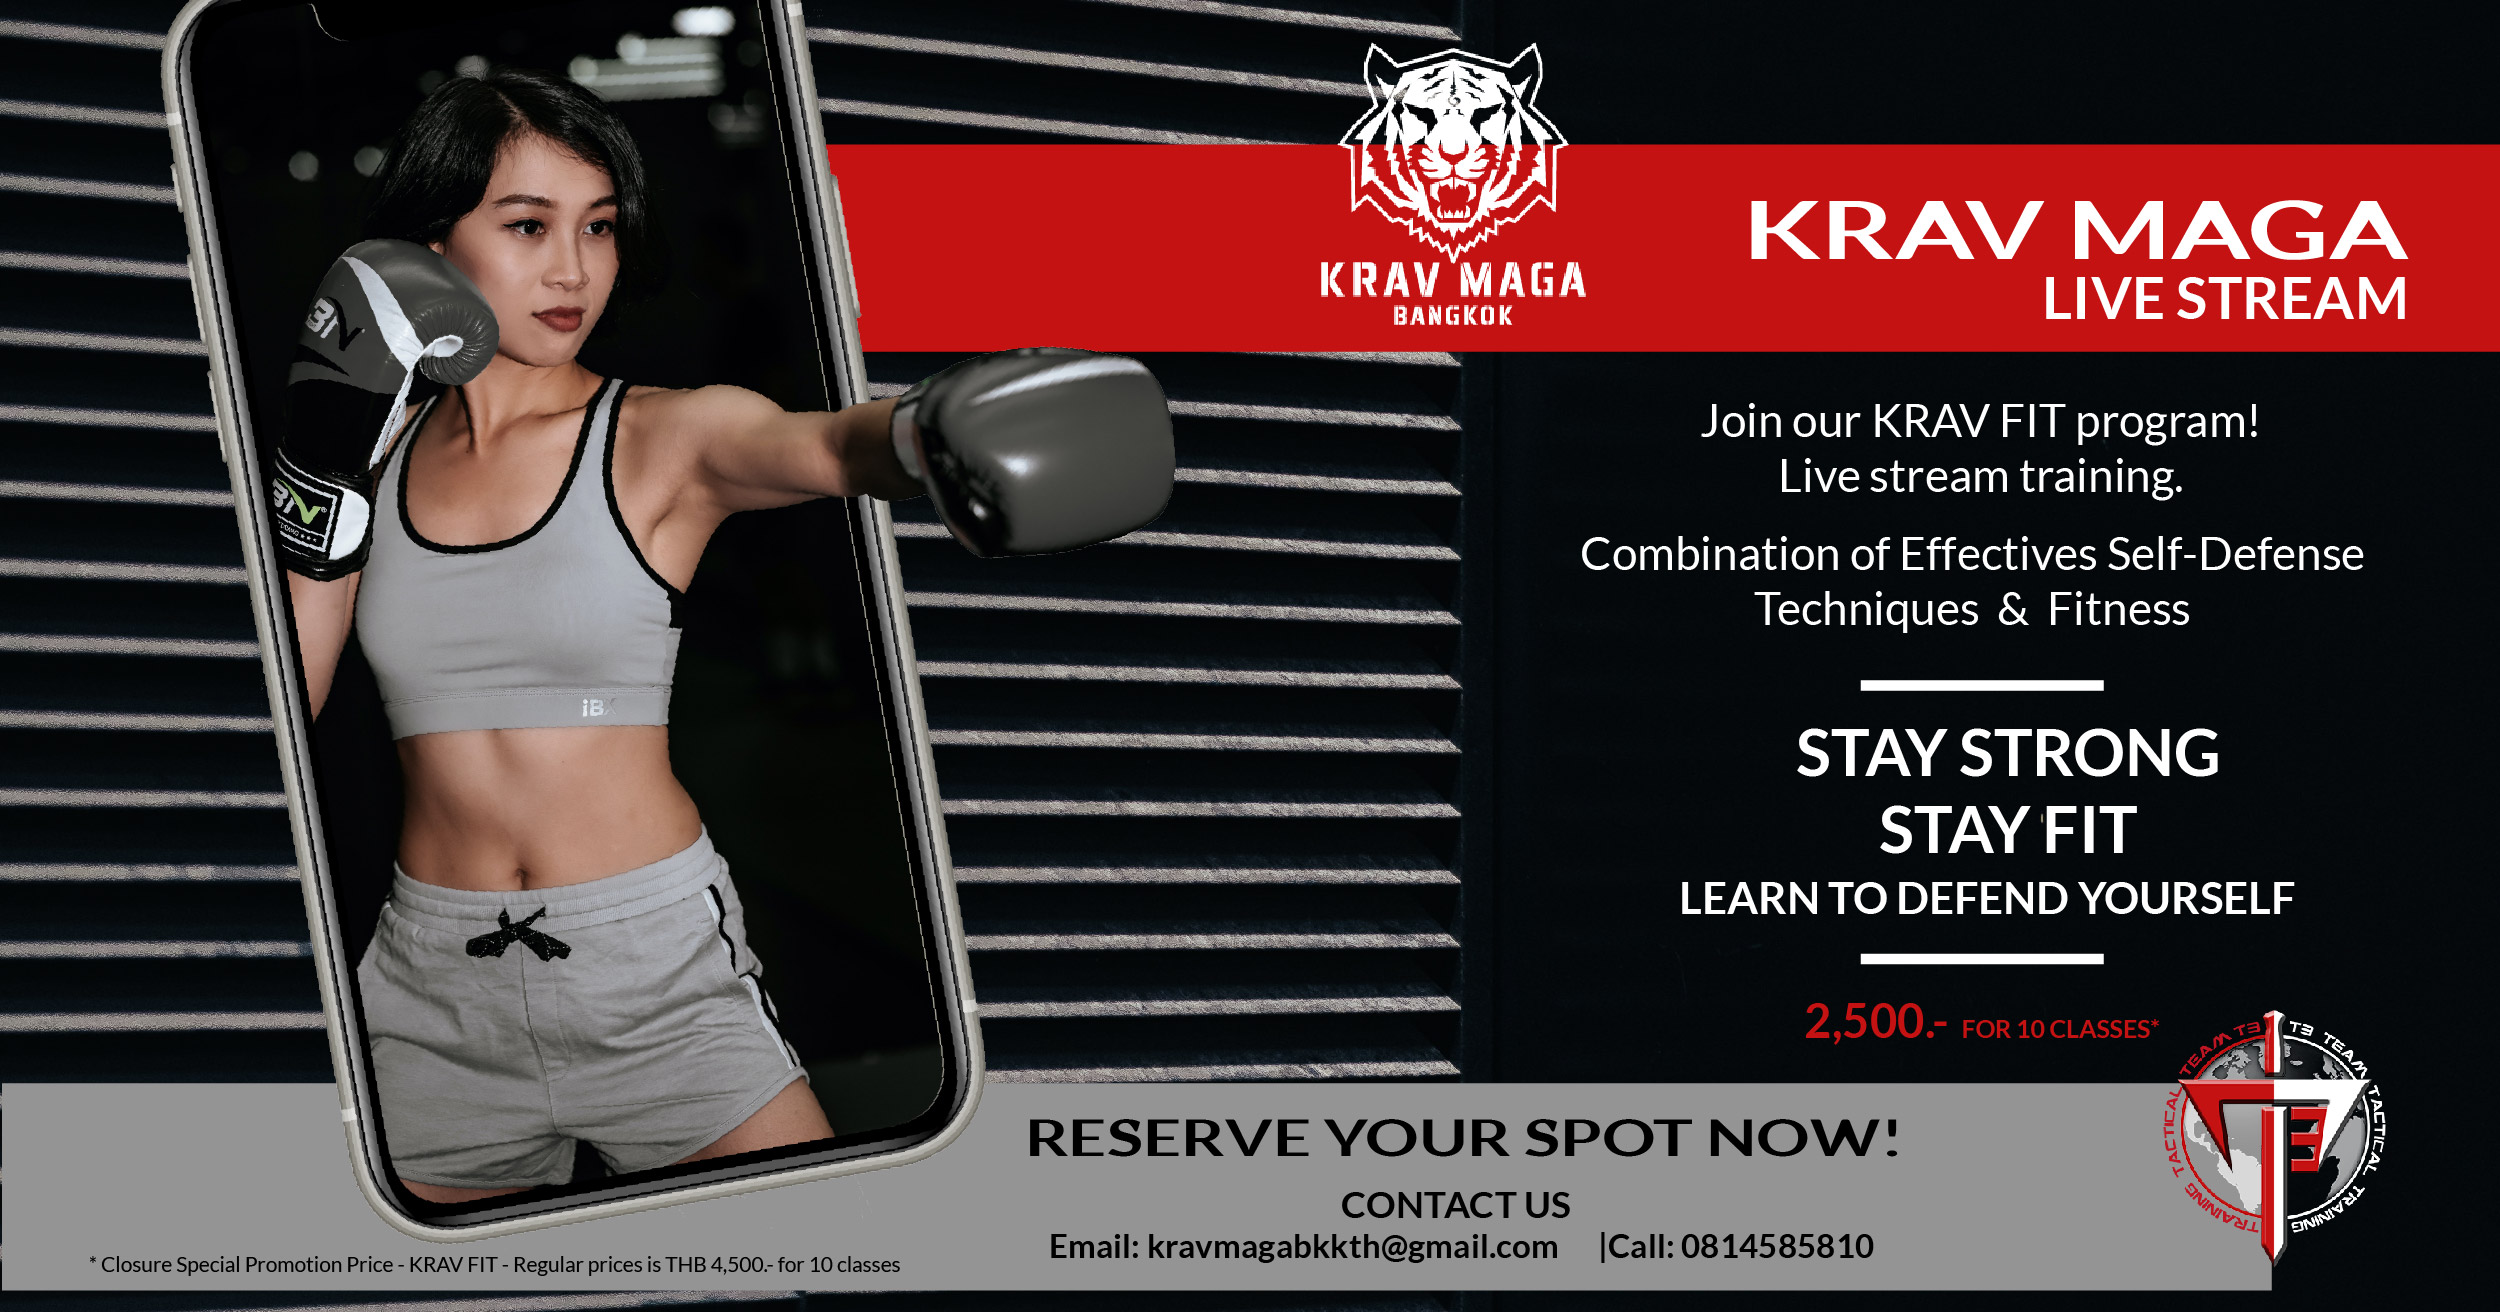 You are currently viewing Krav Maga Live Stream